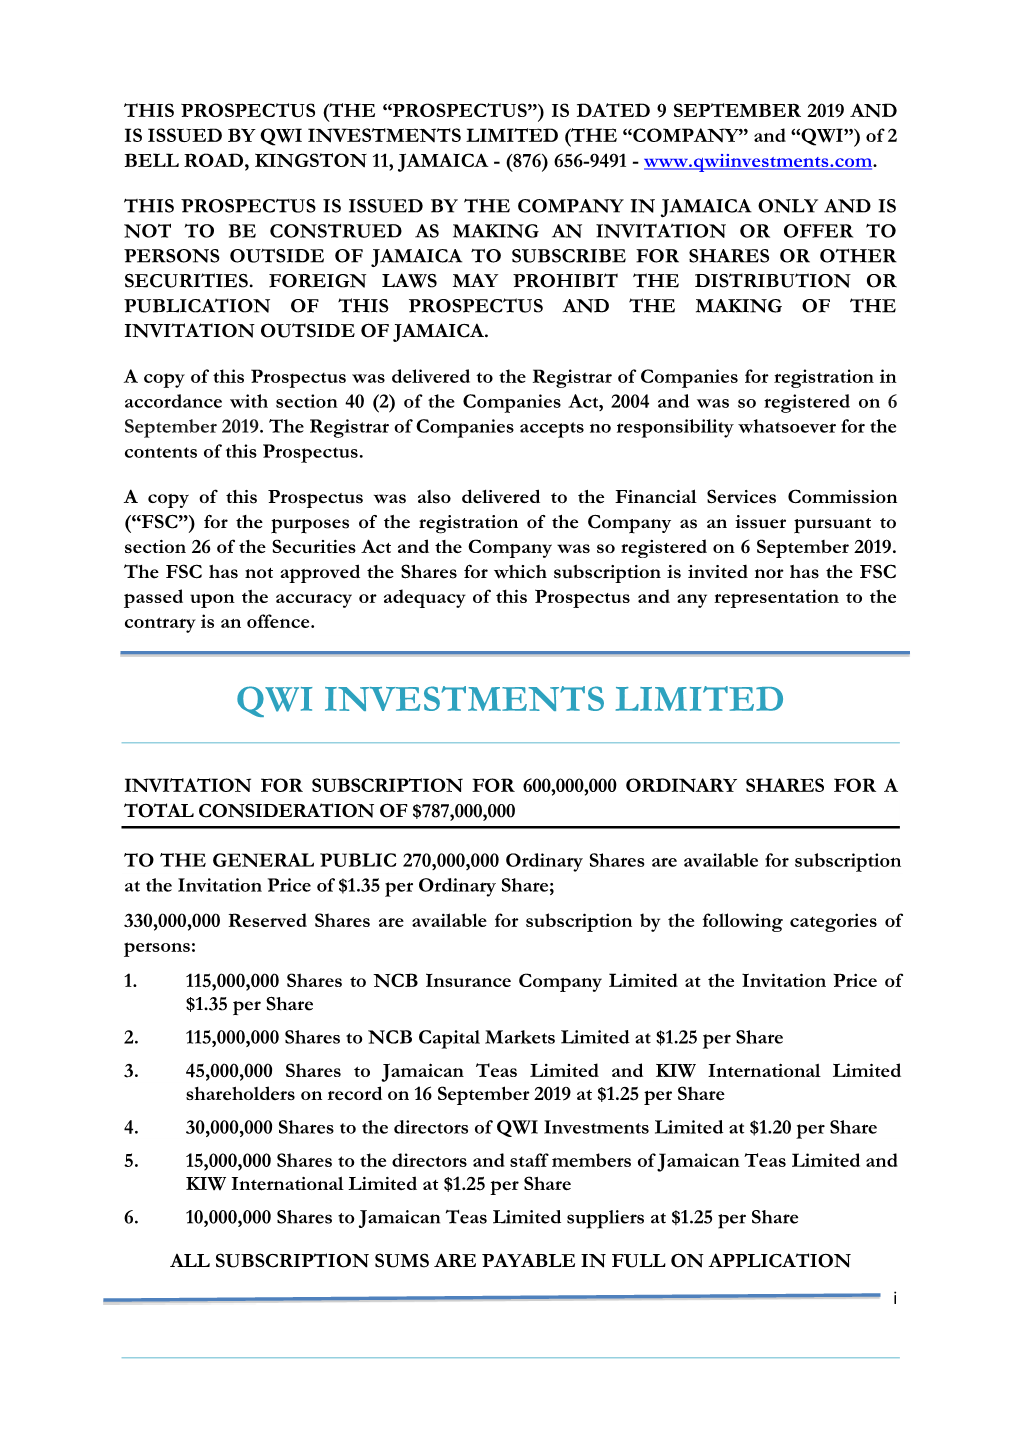 QWI INVESTMENTS LIMITED (THE “COMPANY” and “QWI”) of 2 BELL ROAD, KINGSTON 11, JAMAICA - (876) 656-9491